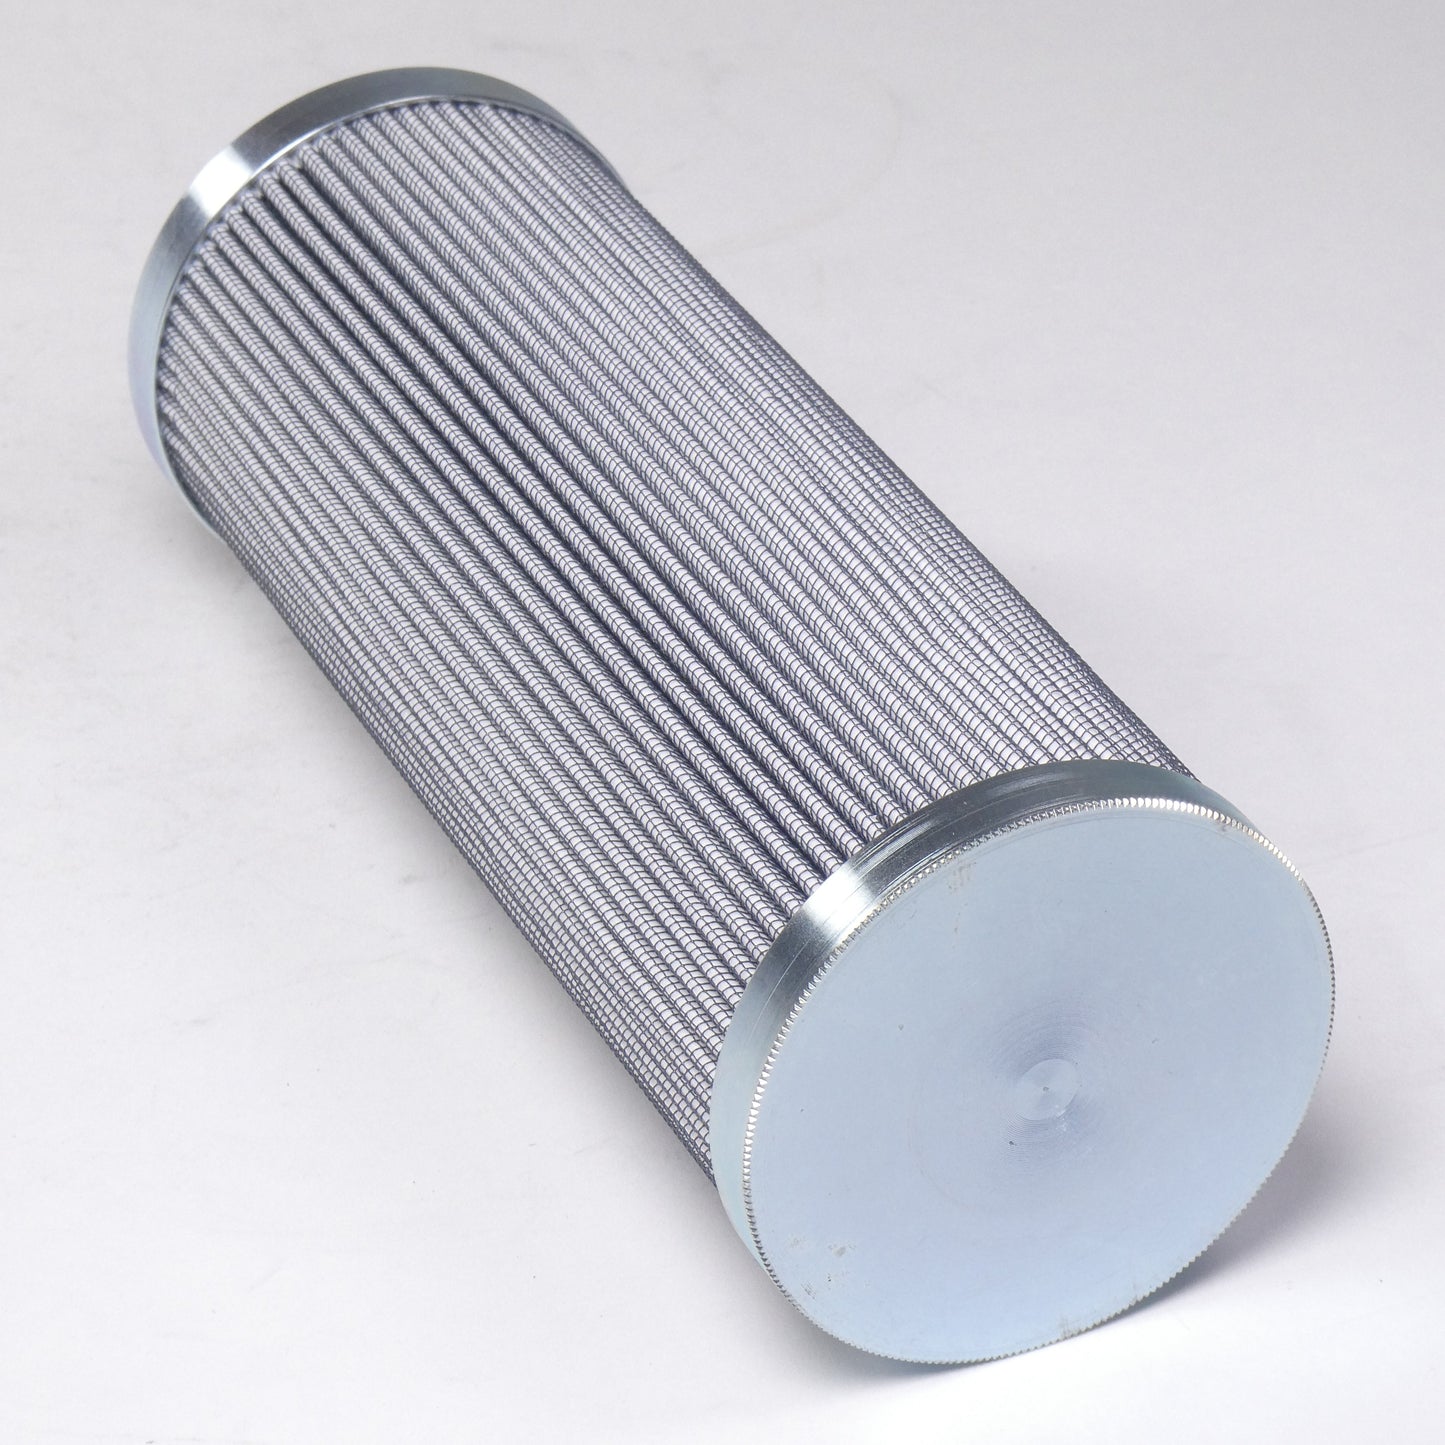 Hydrafil Replacement Filter Element for Finn FC7005A010XS